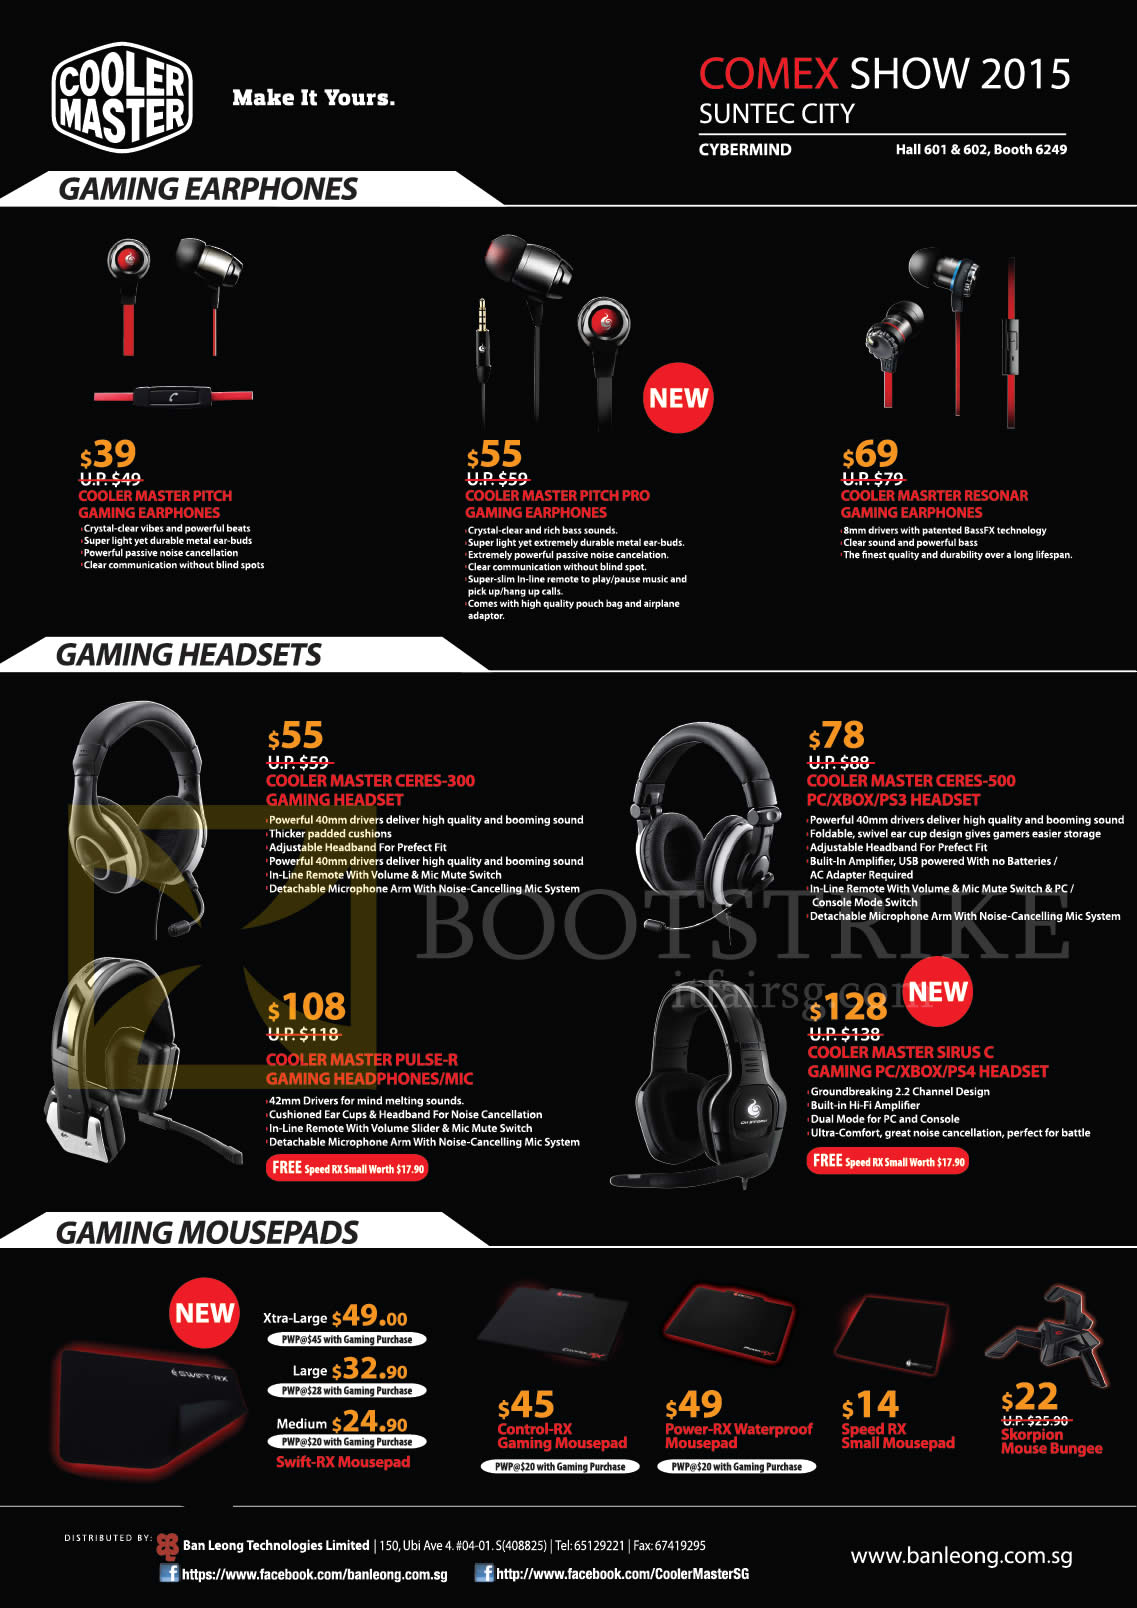 COMEX 2015 price list image brochure of Cooler Master Gaming Earphones, Headsets, Mousepads, Cooler Master Pitch, Pitch Pro, Resonar, Ceres-300, 500, Master Sirus C, Master Pulse-R, Control-RX, Power-RX, Speed RX